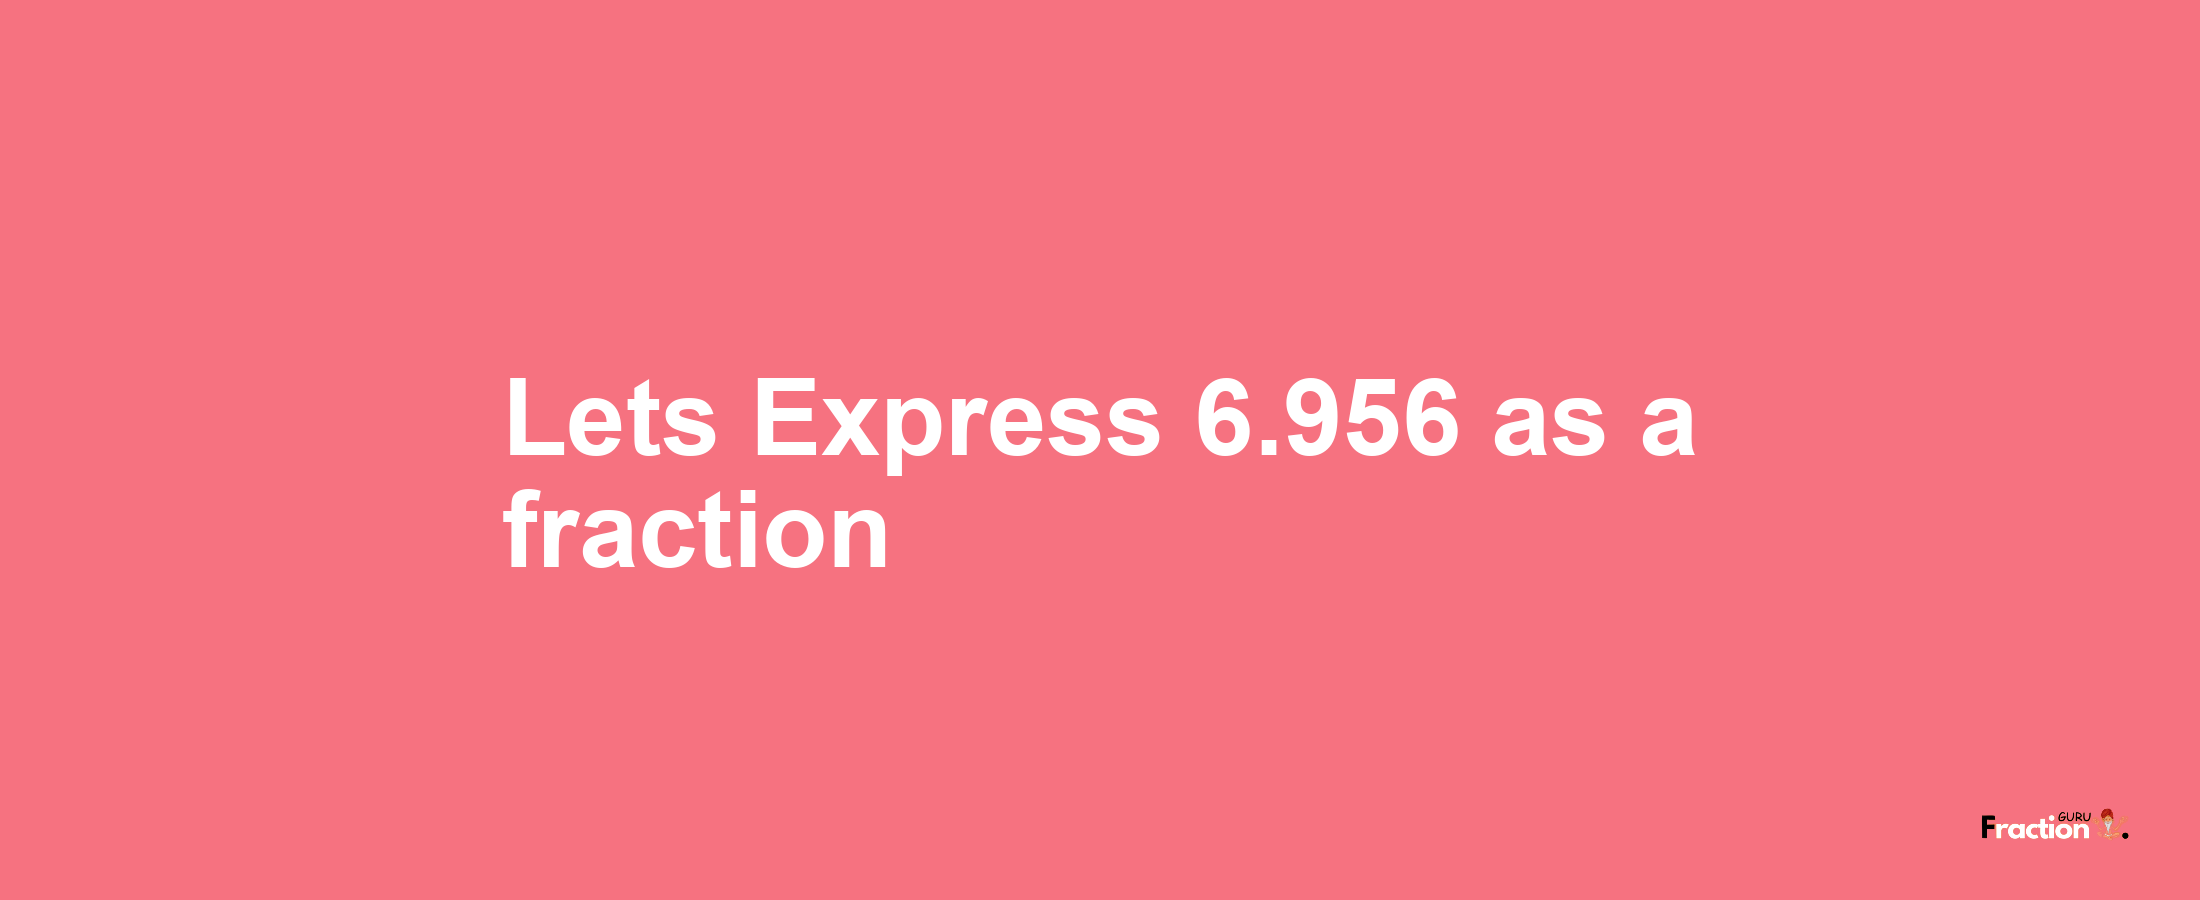 Lets Express 6.956 as afraction